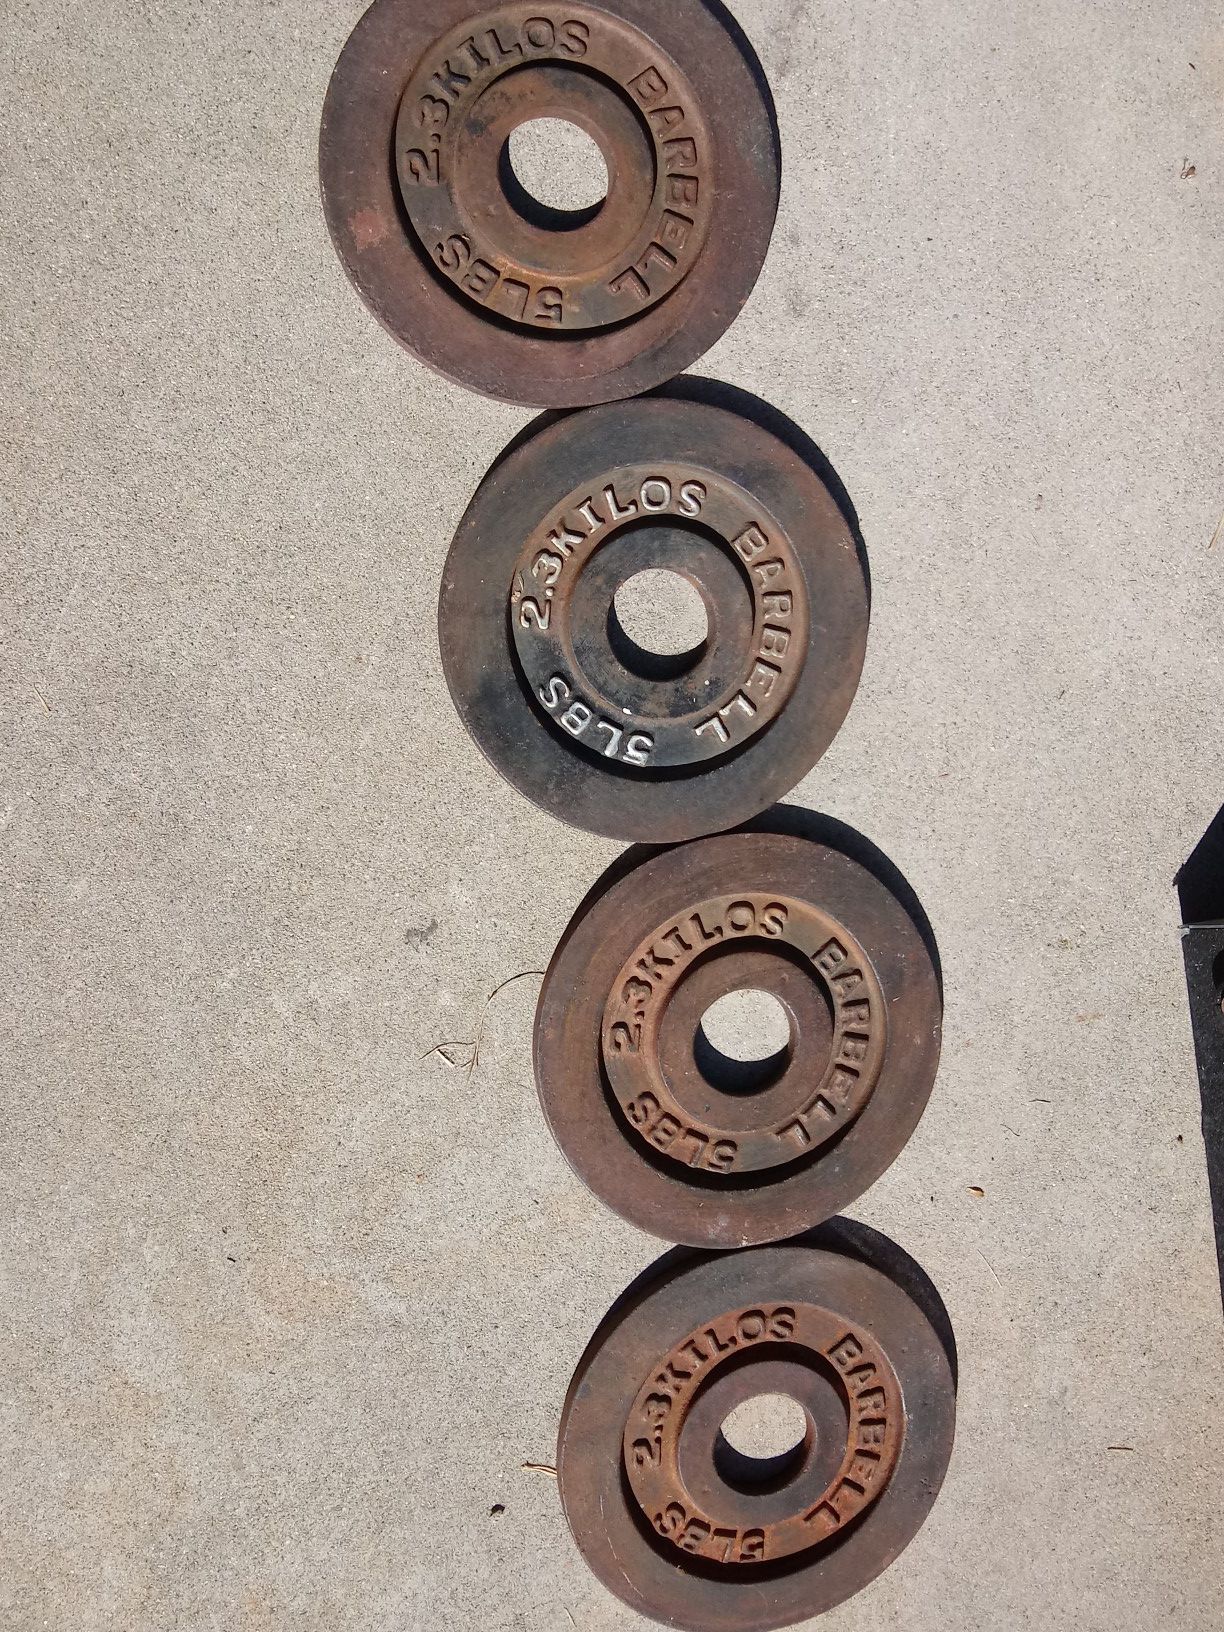 4 5 pound Olympic weights for 2 inch bar 20 pounds total All Matching